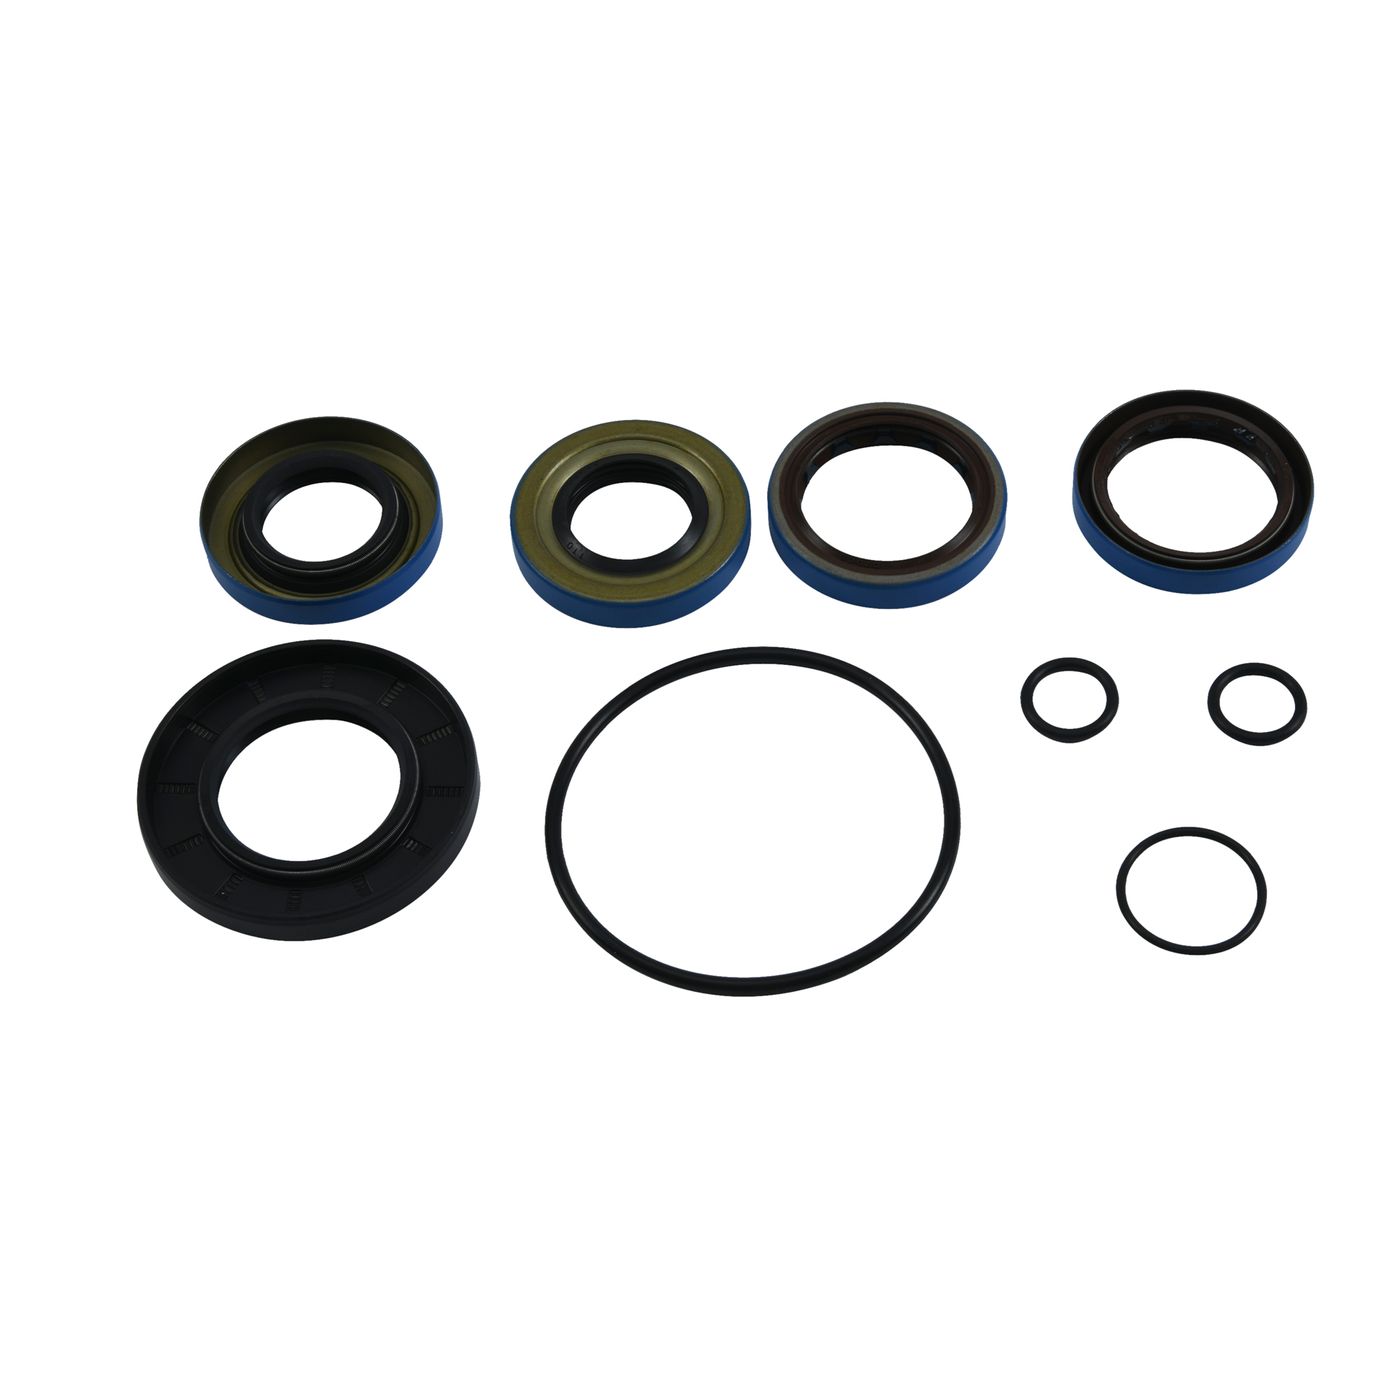 Wrp Diff Seal Kits - WRP252134-5 image